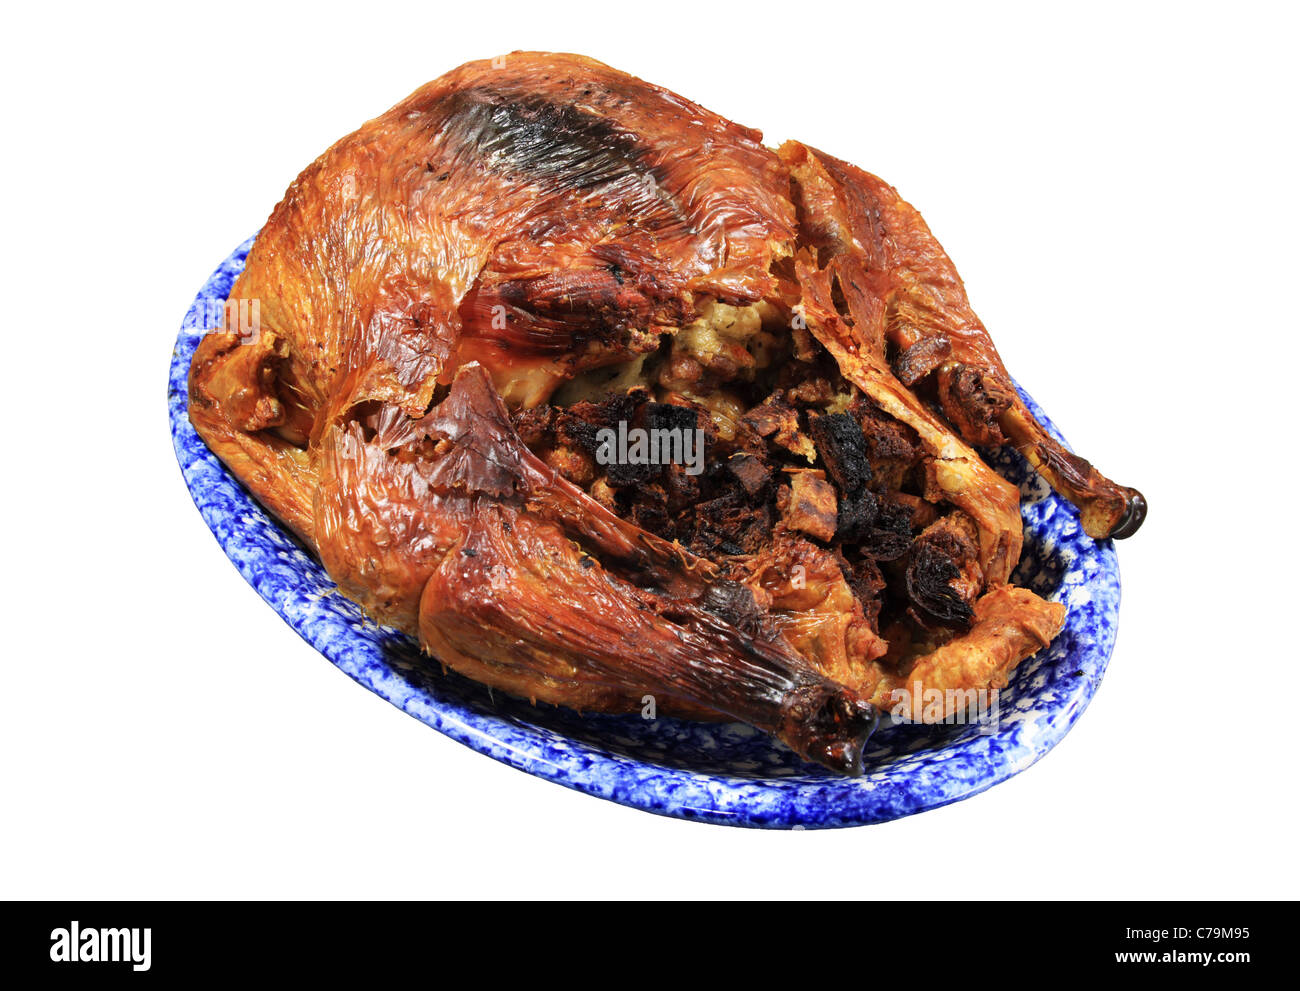 overcooked baked turkey on a platter isolated on white Stock Photo